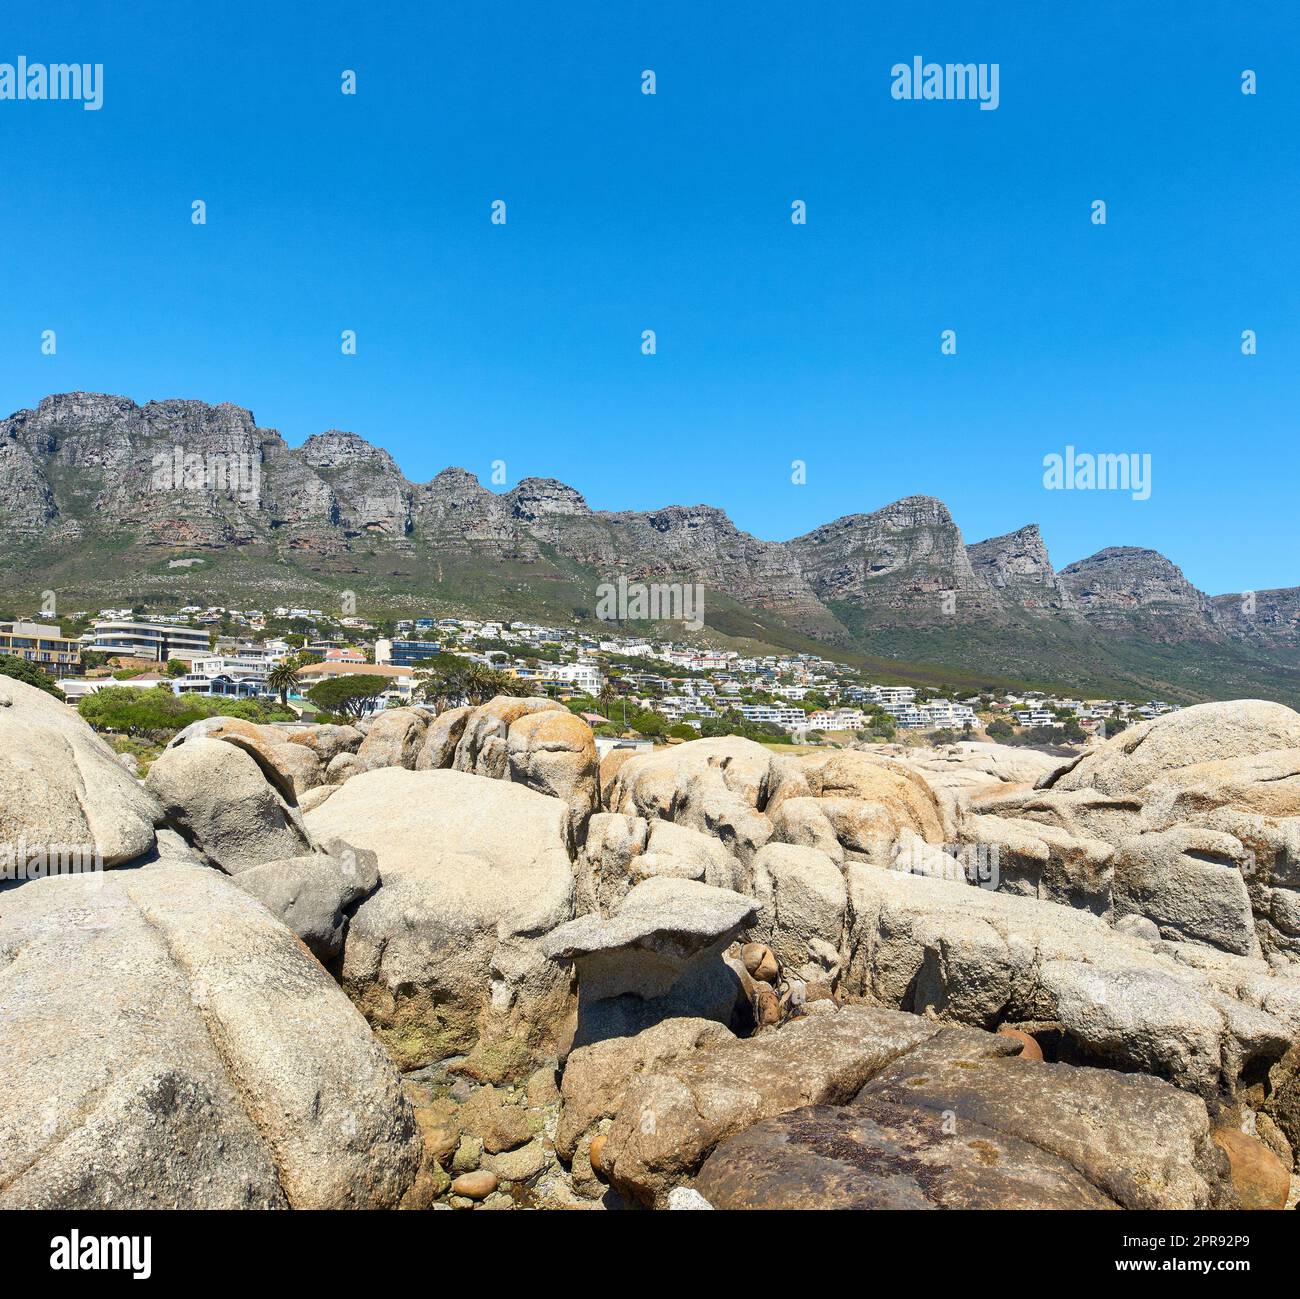 Twelve Apostles at Table Mountain in Cape Town against a clear blue sky background on a sunny day with copy space. View of a peaceful suburb surrounded by scenic mountain landscape and beach boulders Stock Photo